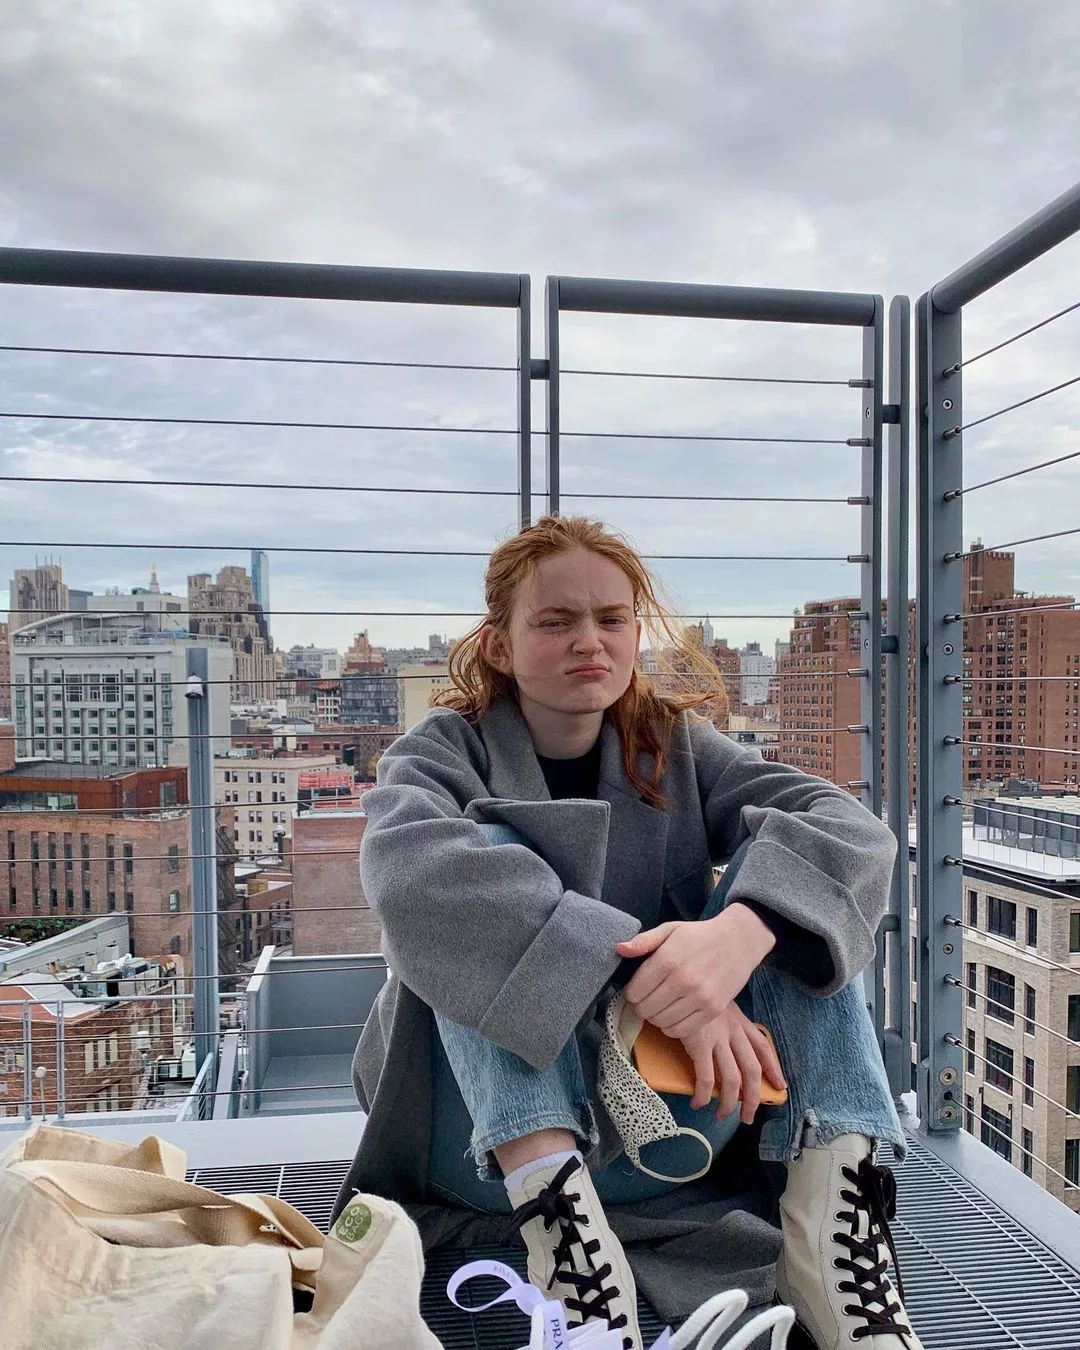 Sadie sitting on the roof top wearing grey colored hood and blue jeans.